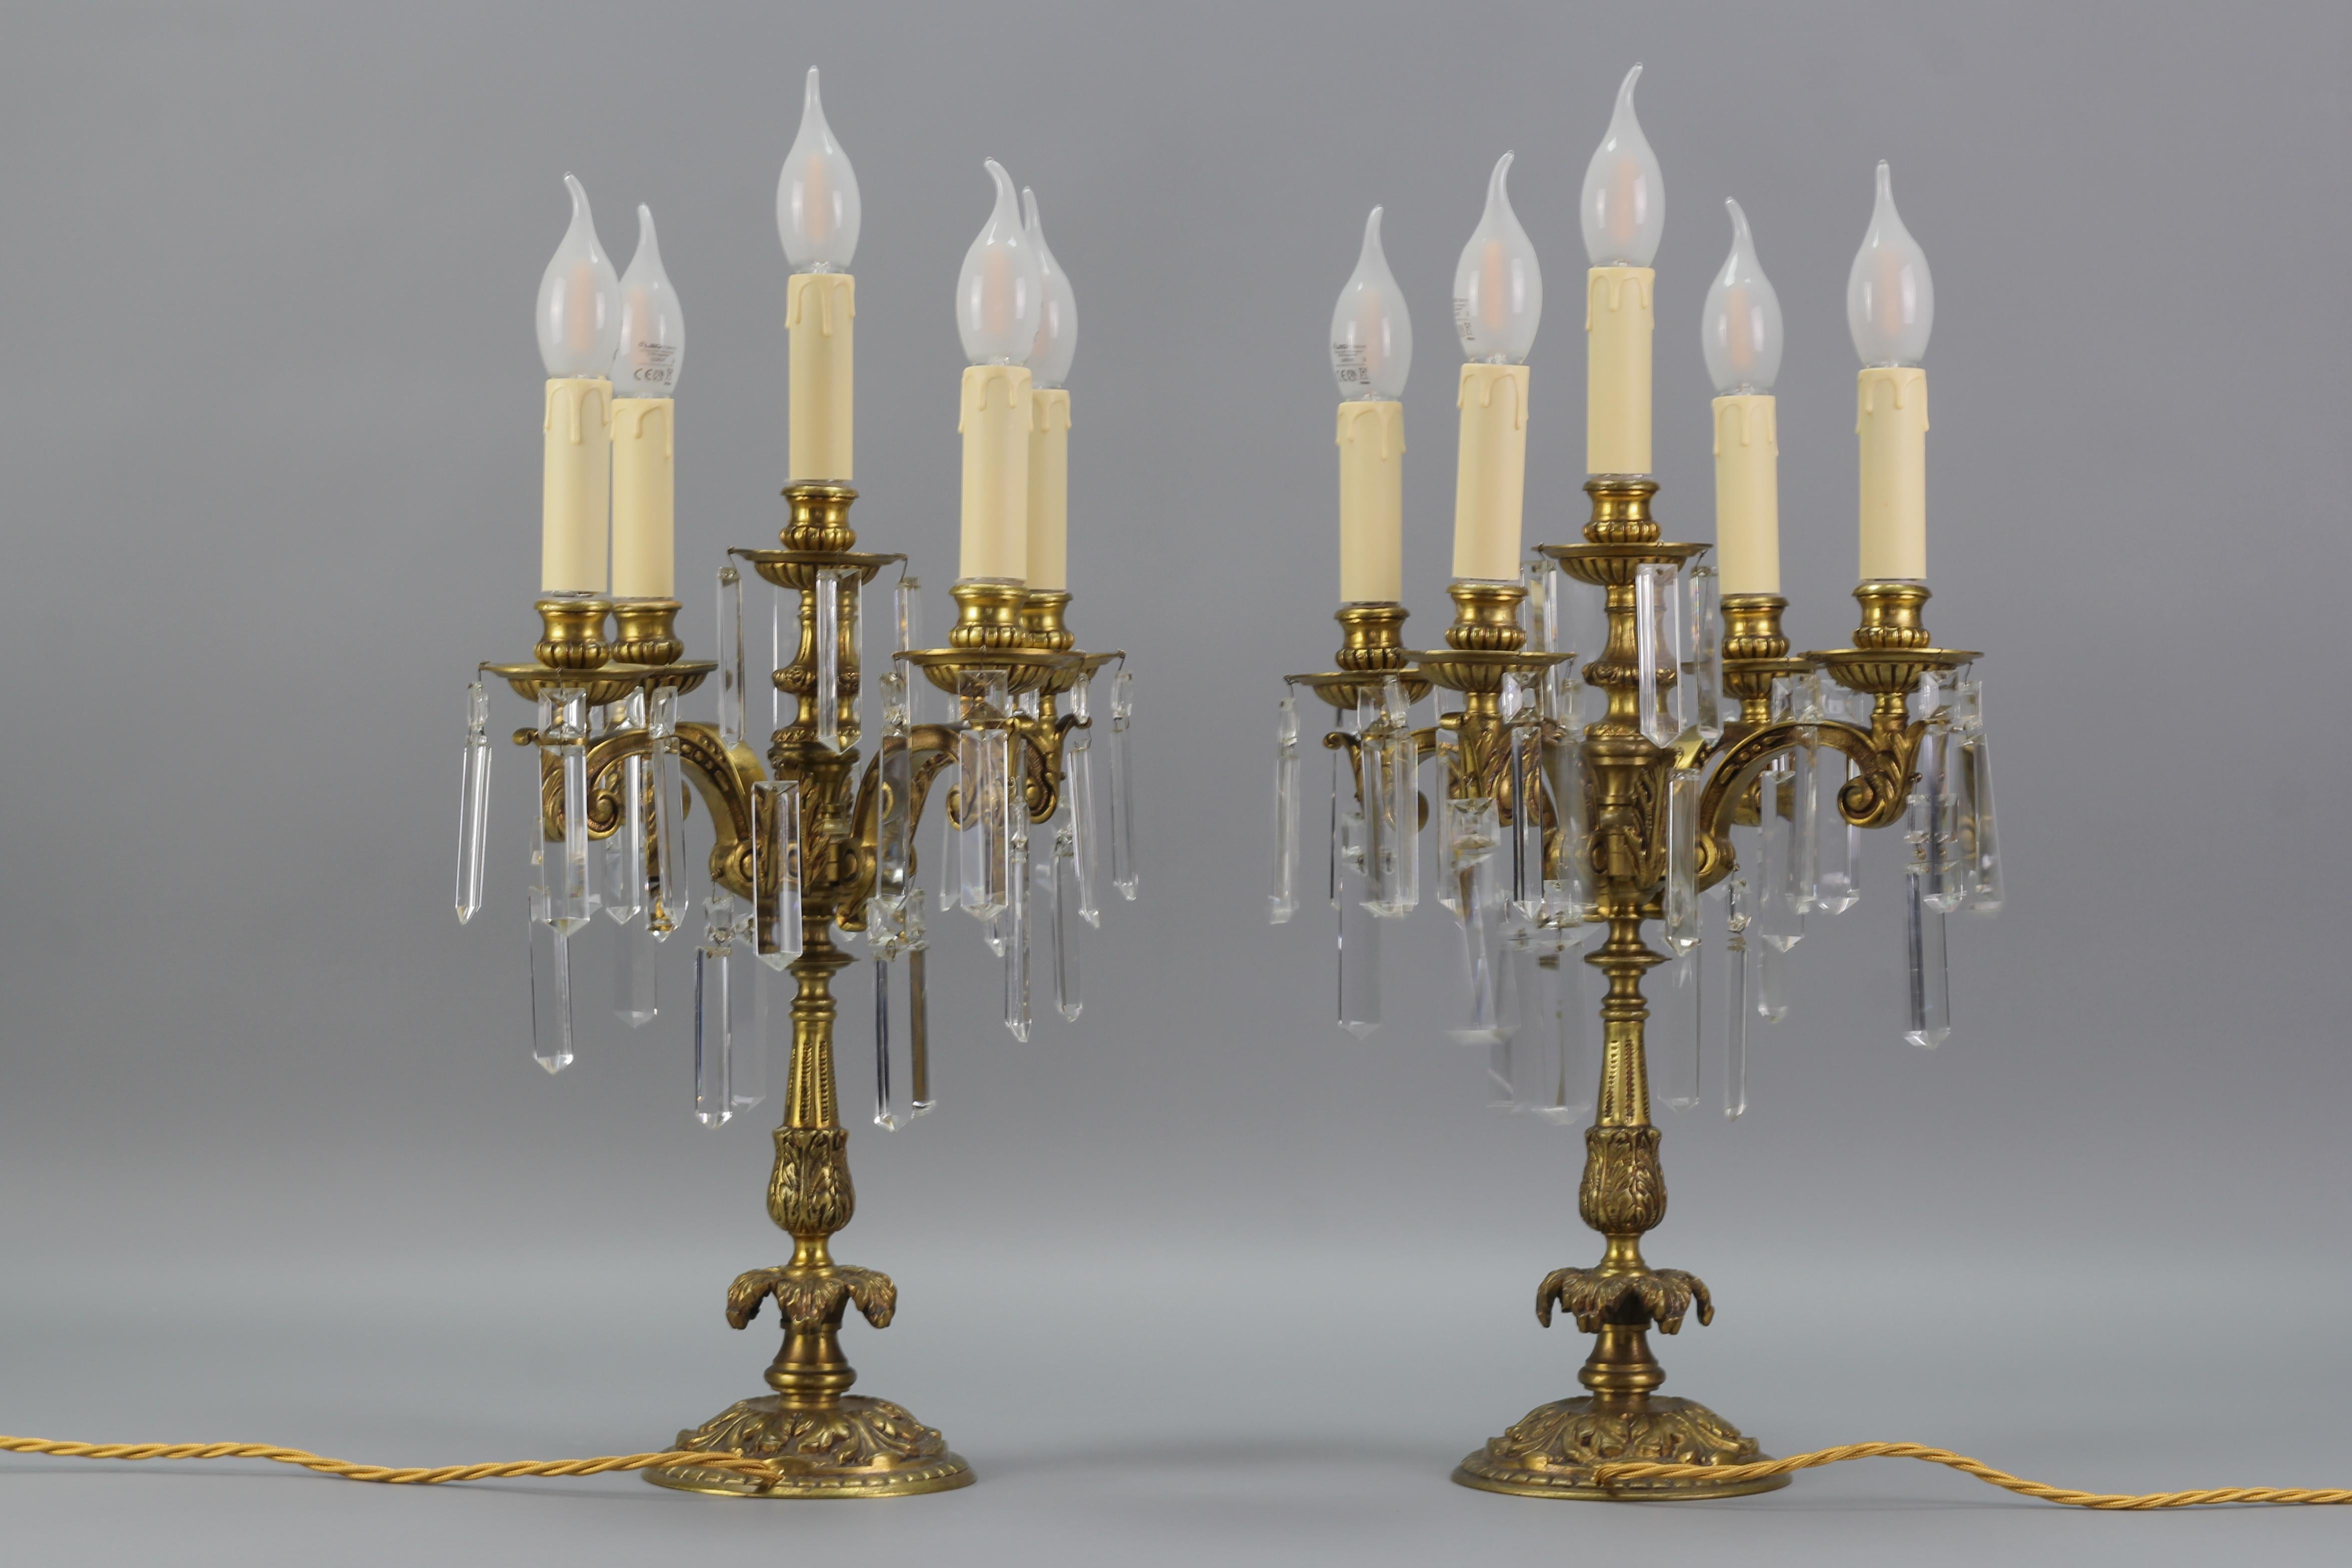 French Louis XVI Style Bronze and Crystal Candelabra Table Lamps, Set of 2 For Sale 3